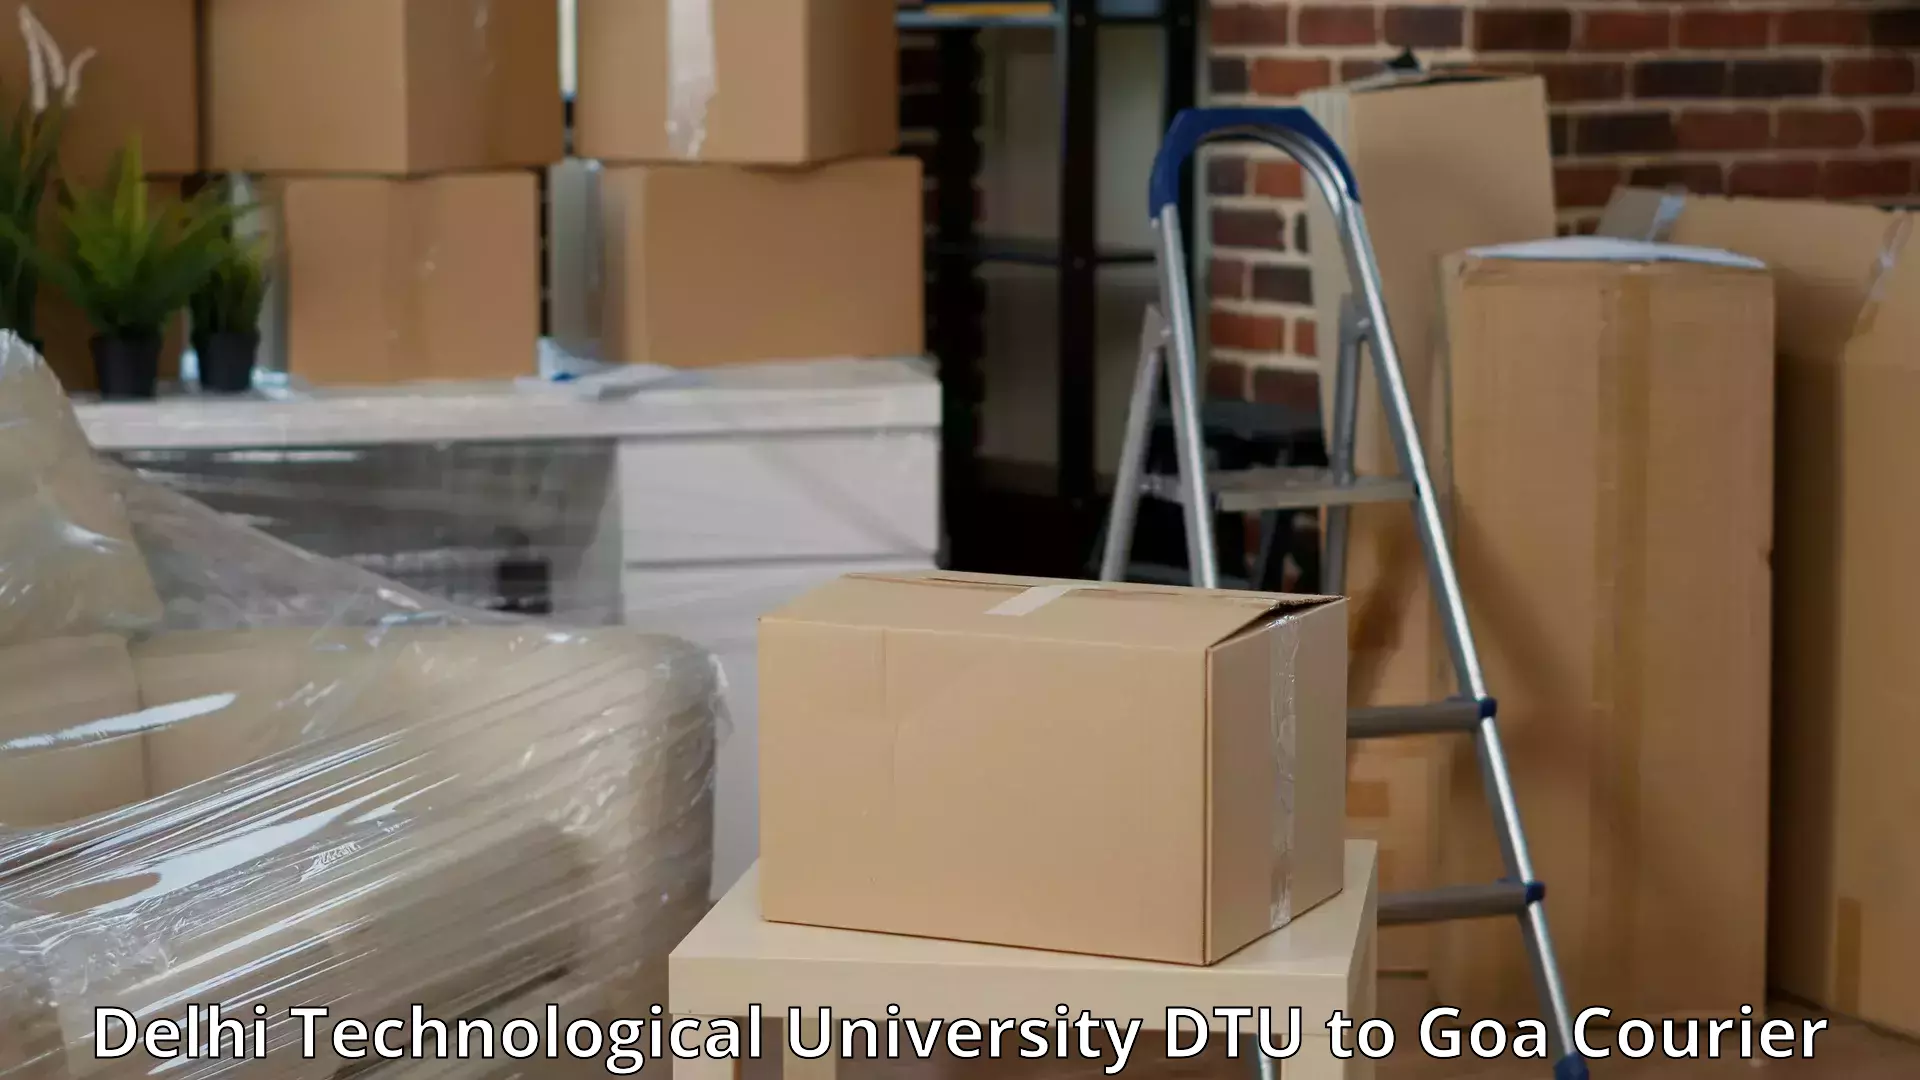 Professional movers and packers Delhi Technological University DTU to Goa